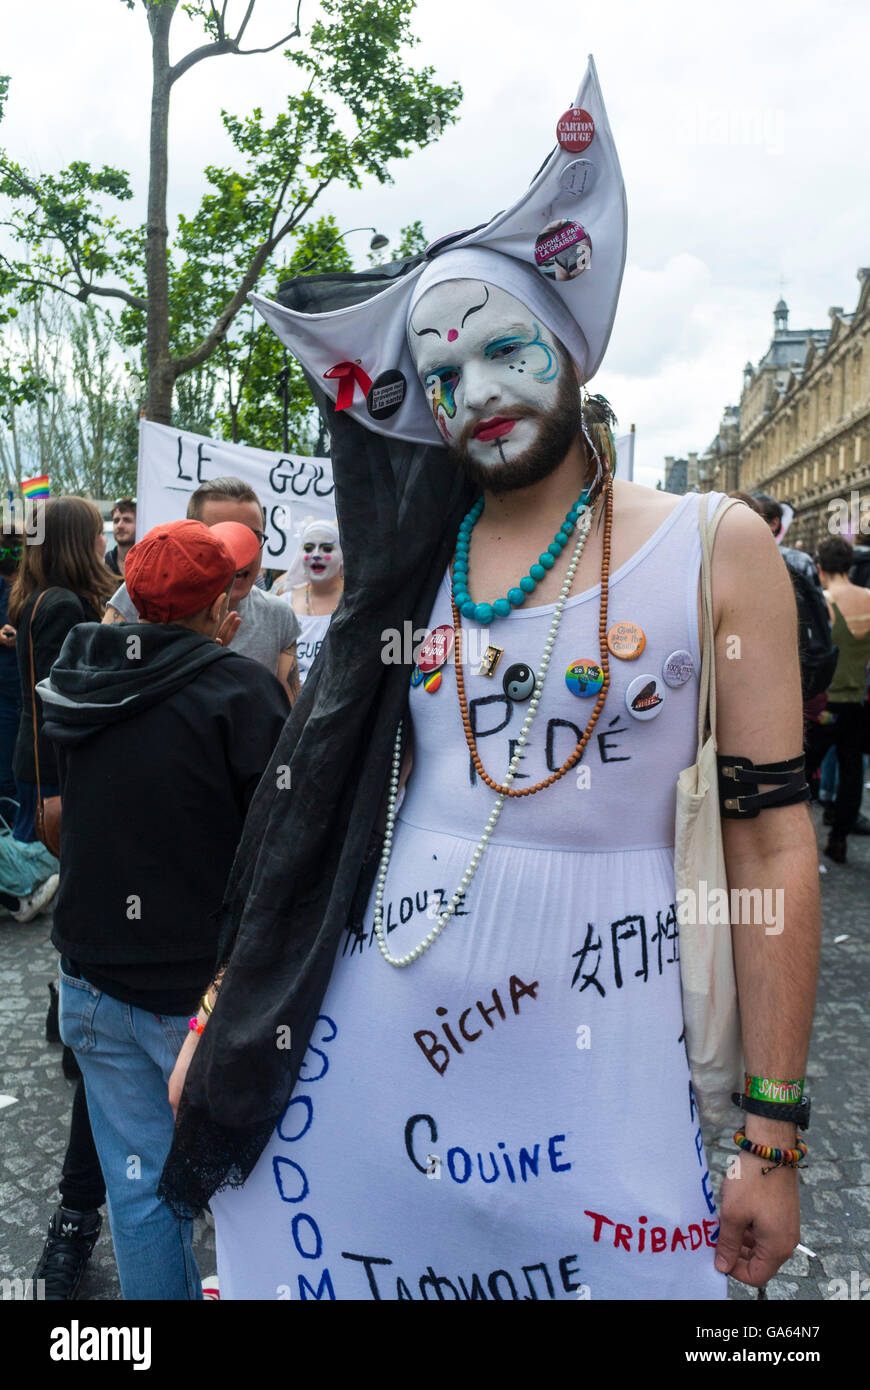 Paris, France, French Gay Pride, LGBTQ Activism, Travestie, Nun, man in Makeup, Posing with Homophobic insults on Costume, Protests, Queer activism, Strange people unusual protester in france Stock Photo